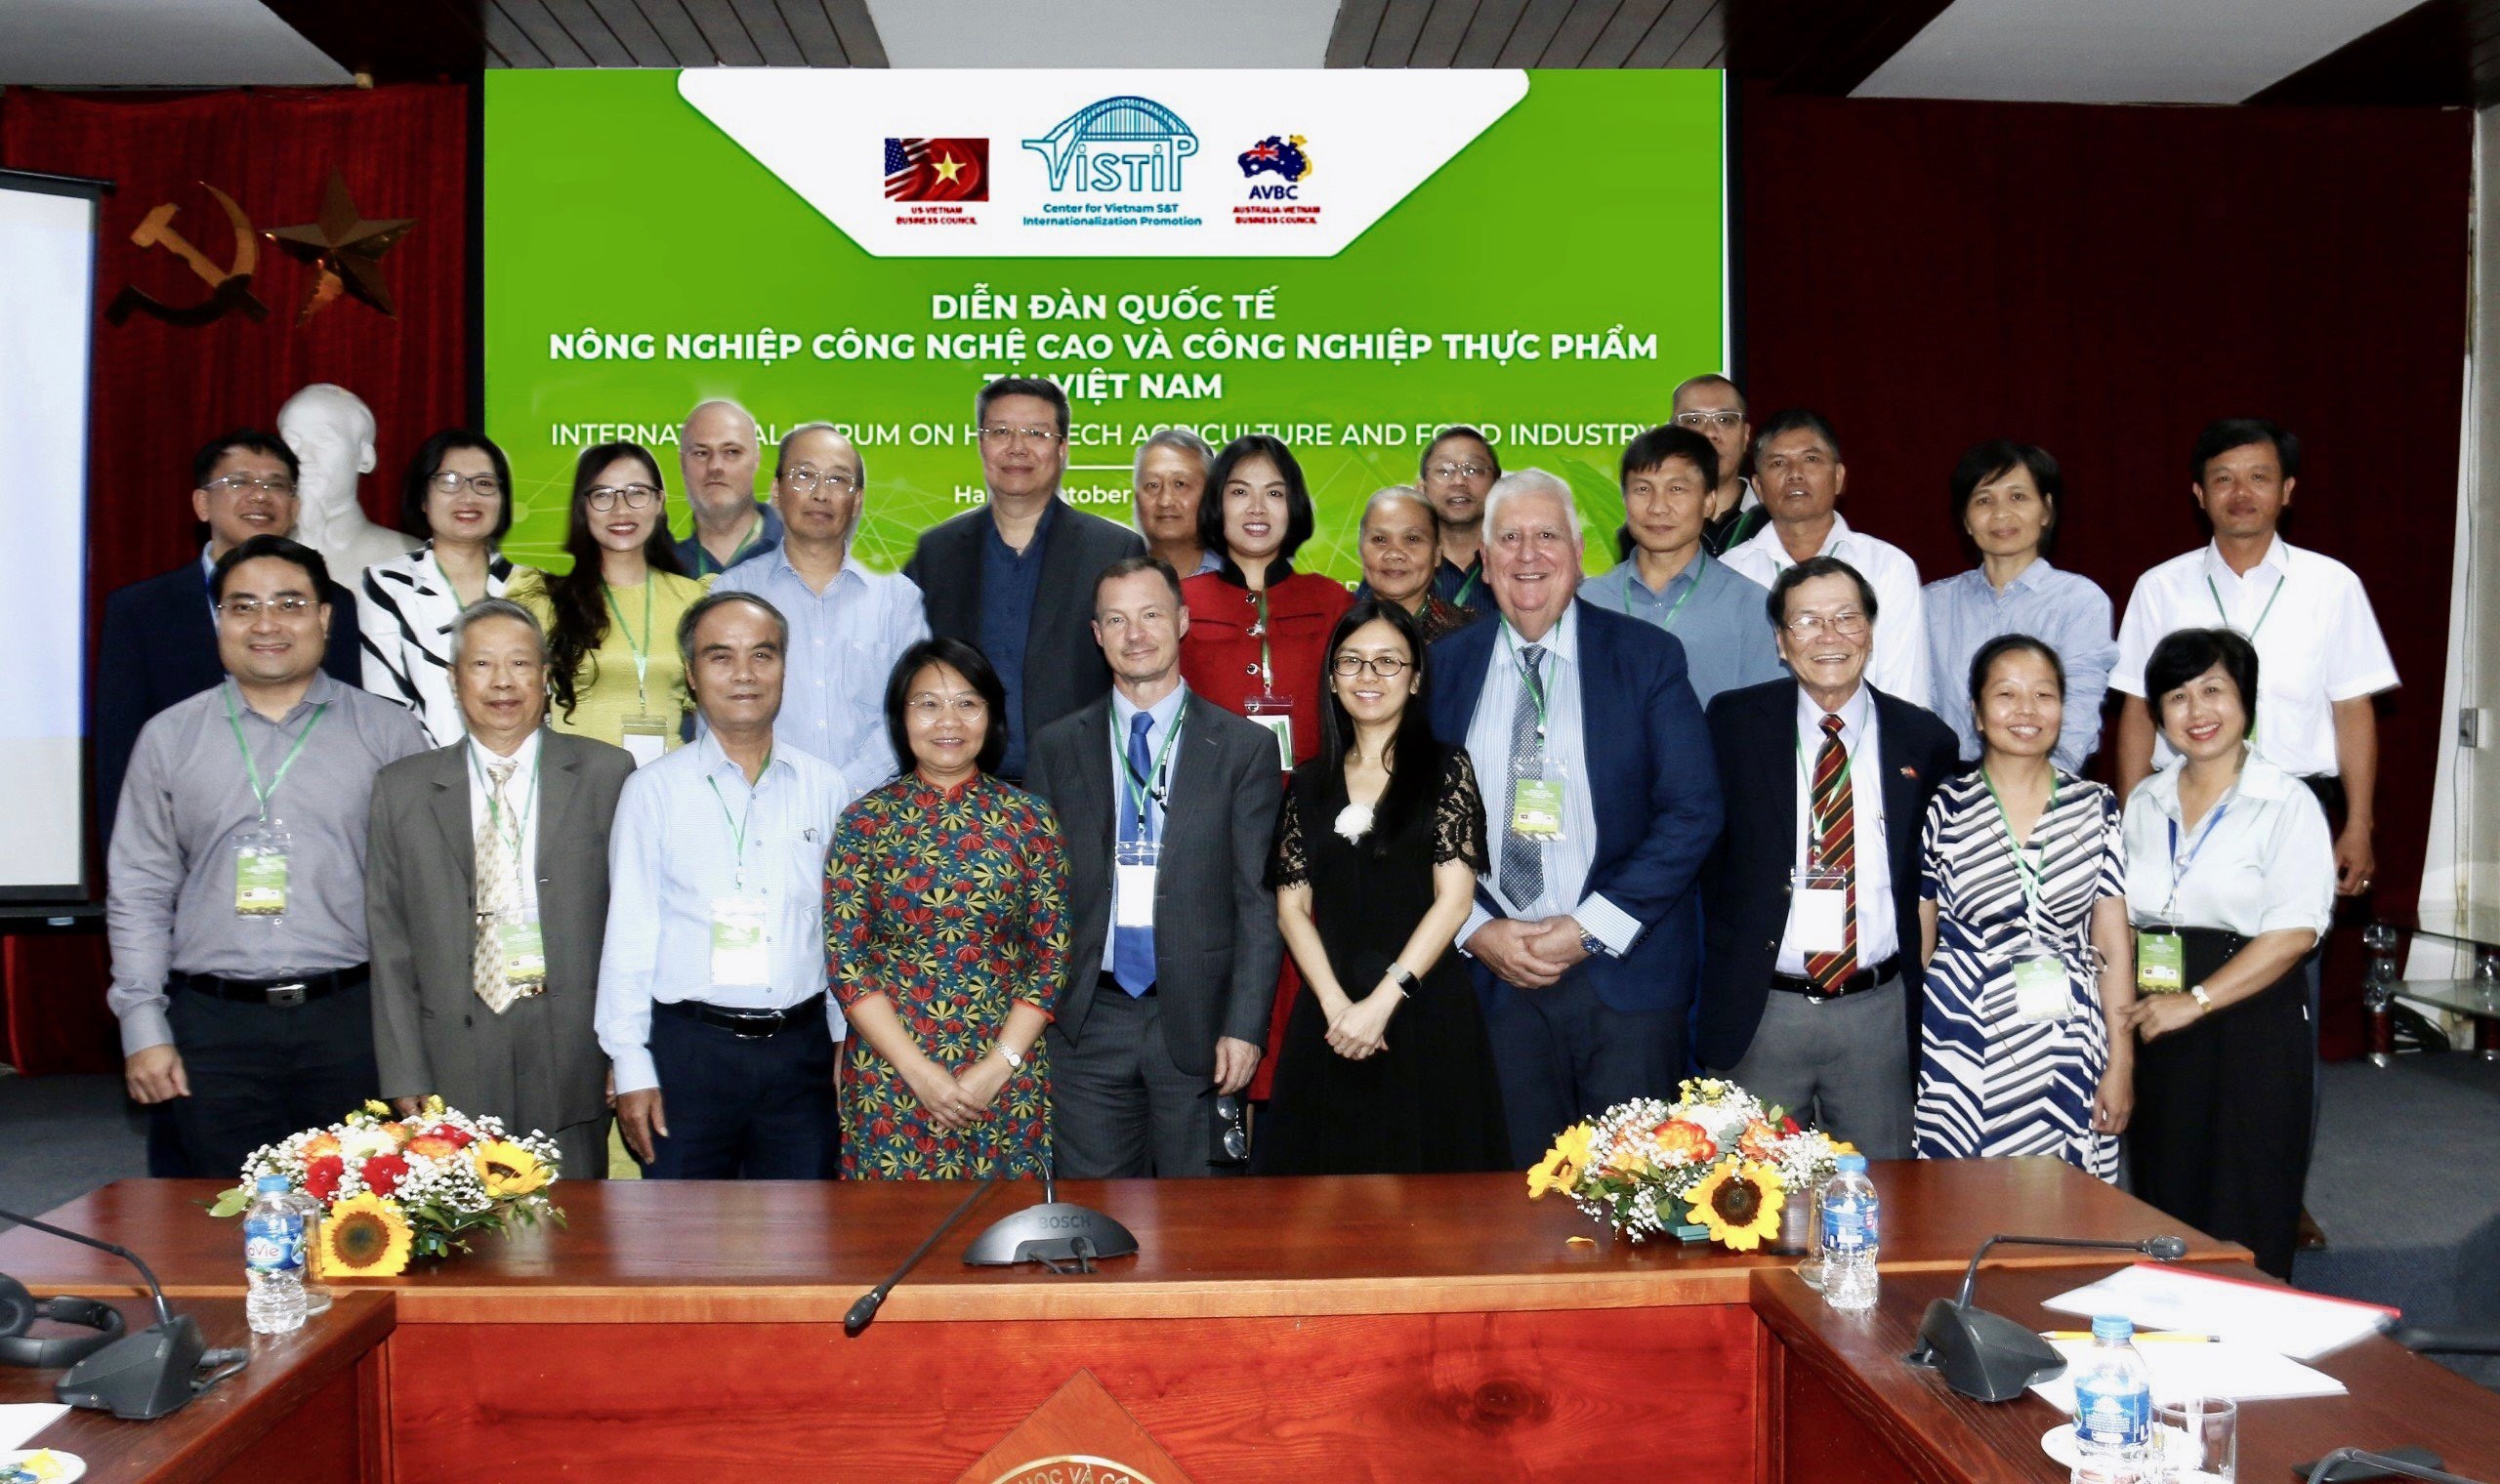 Building a cooperative triangle on science and technology, innovation and trade in high agtech and foods industry among Vietnam, United States and Australia